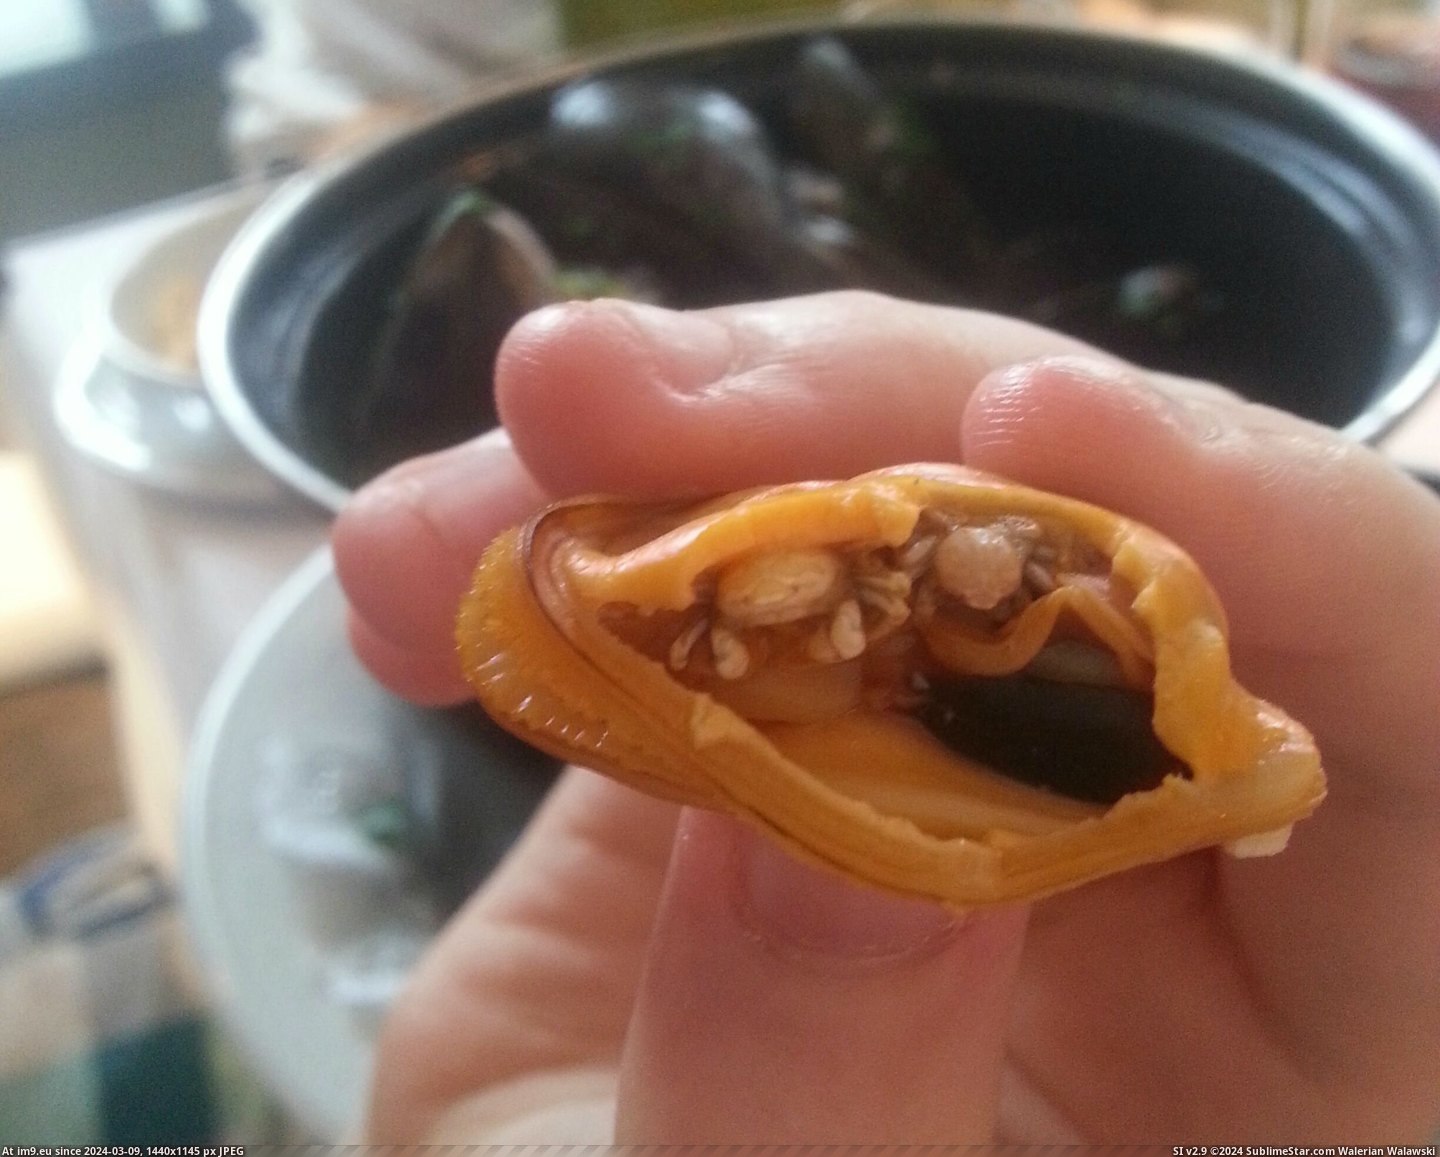 #Wtf #Two #Crabs #Mussel #Tiny #Eat [Wtf] Found two tiny crabs in the mussel I was about to eat Pic. (Image of album My r/WTF favs))